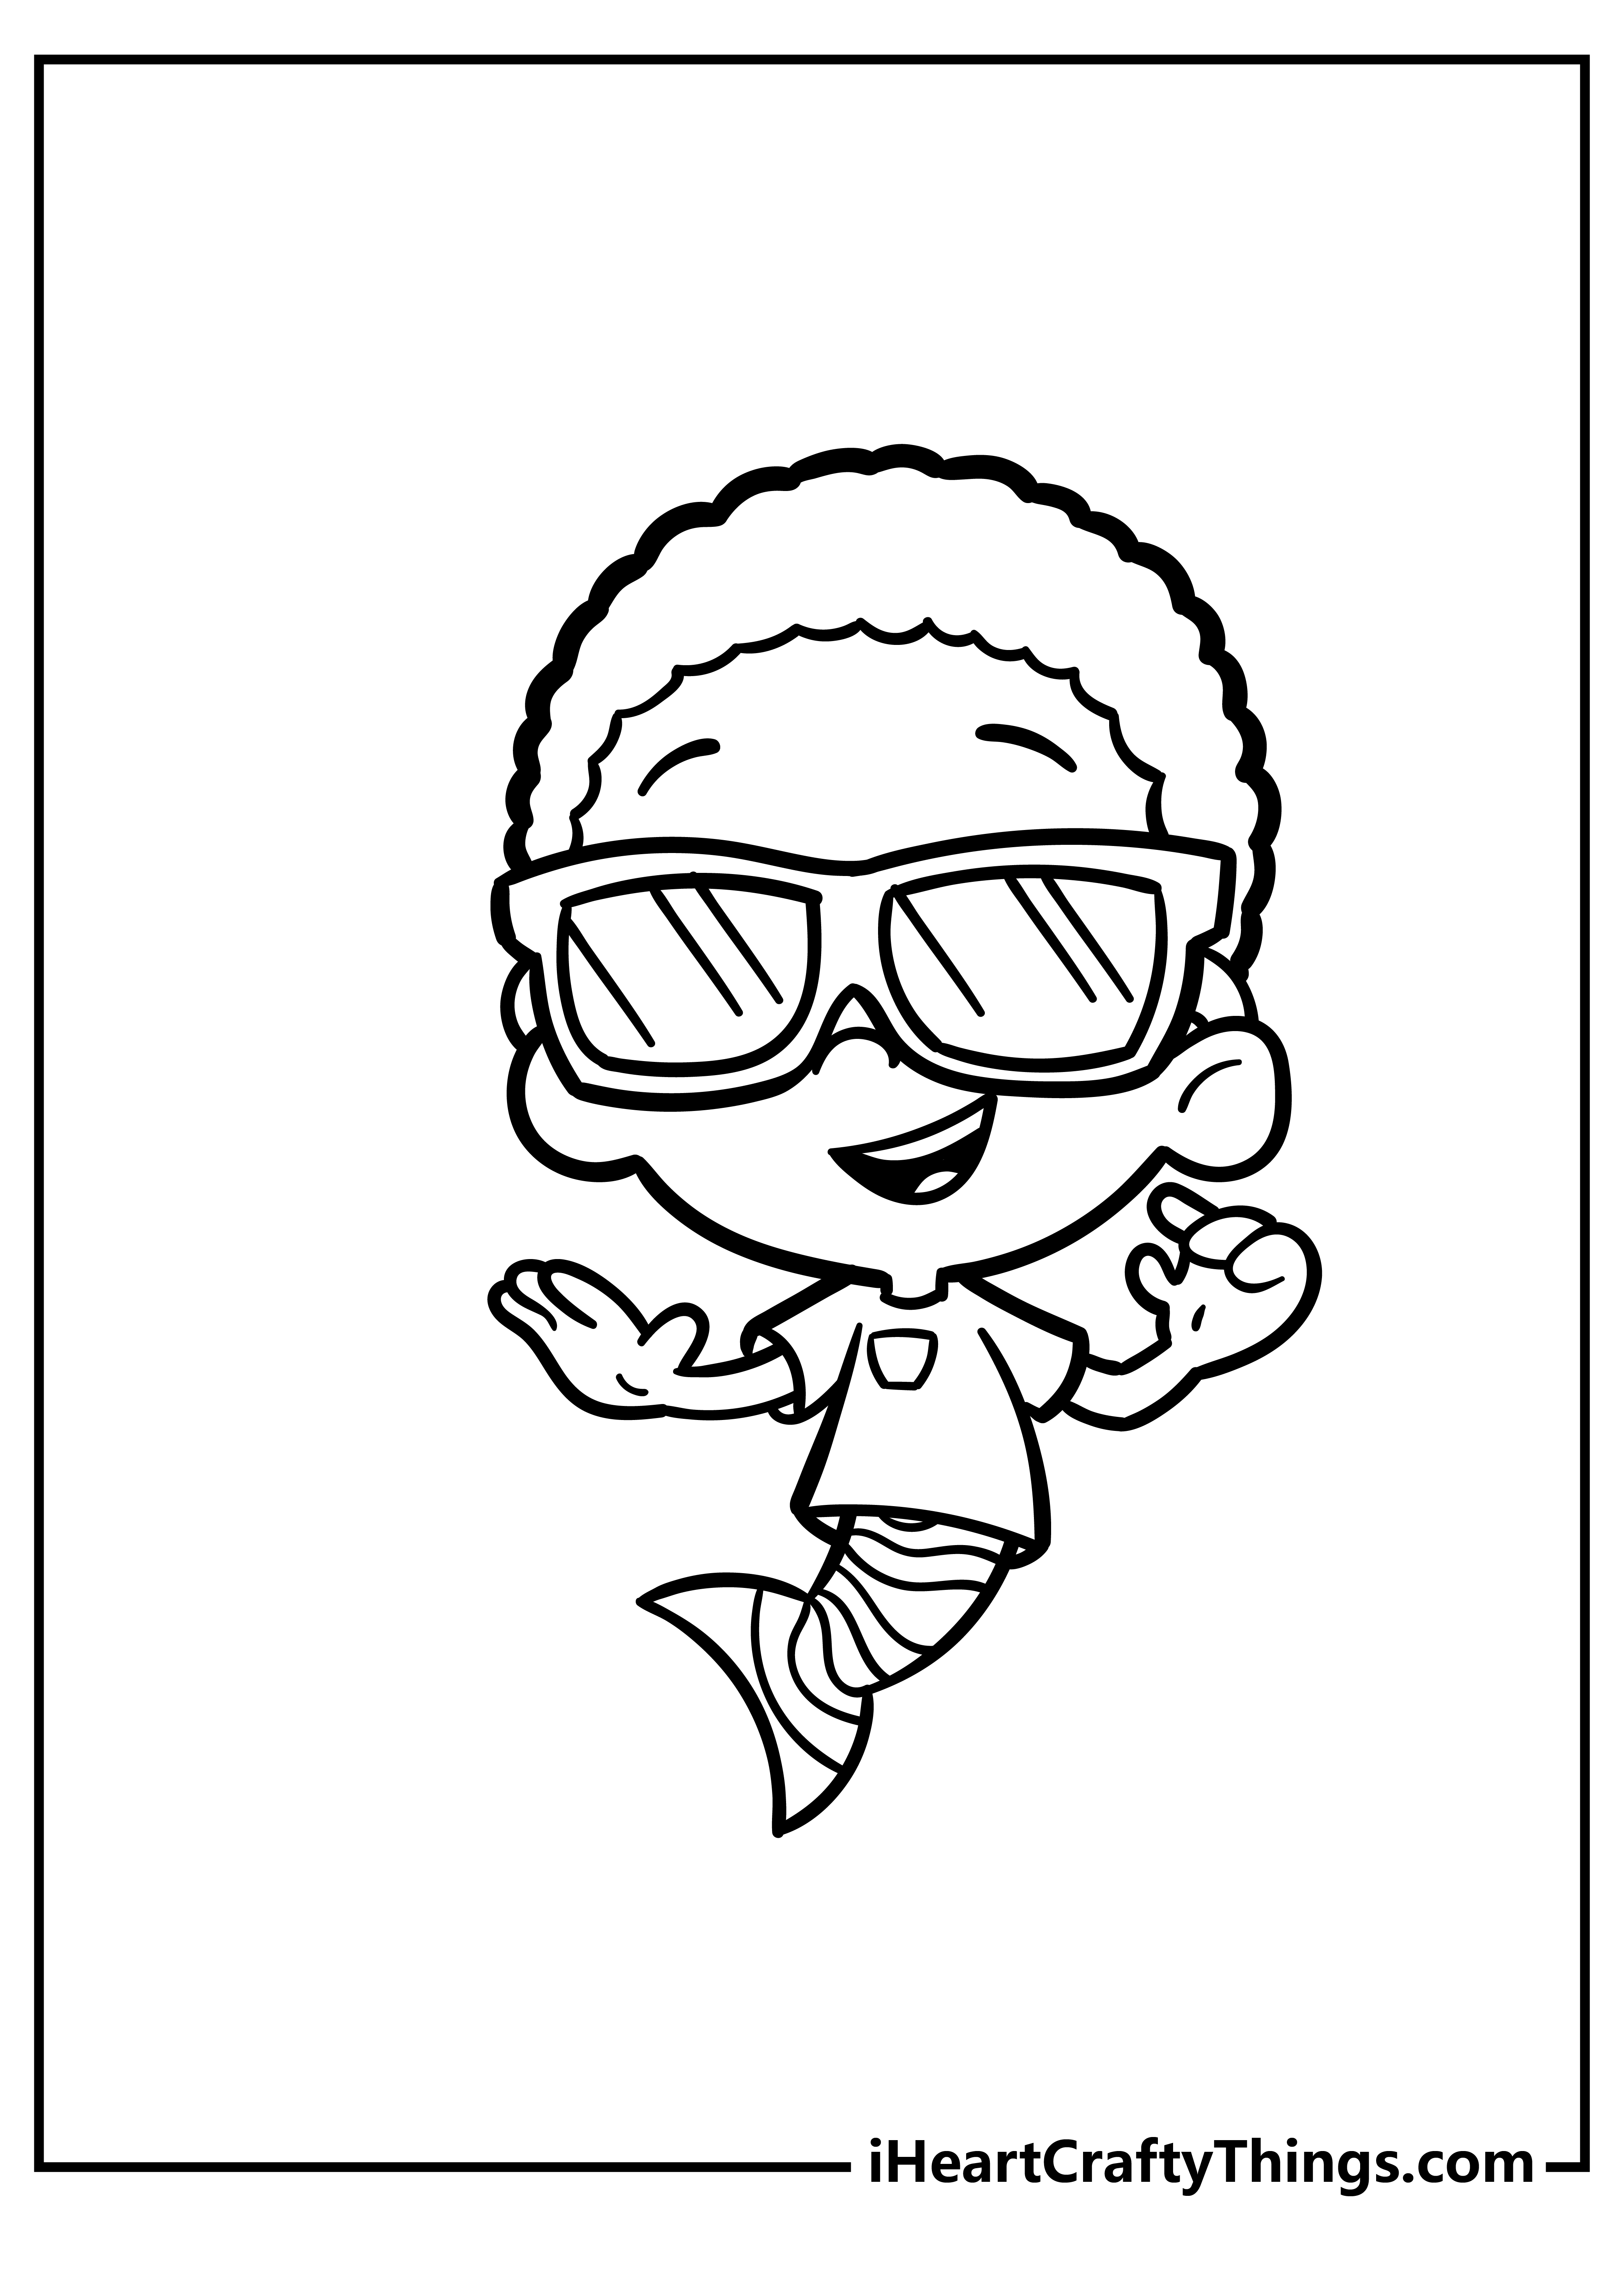 Bubble Guppies Coloring Pages for kids free download